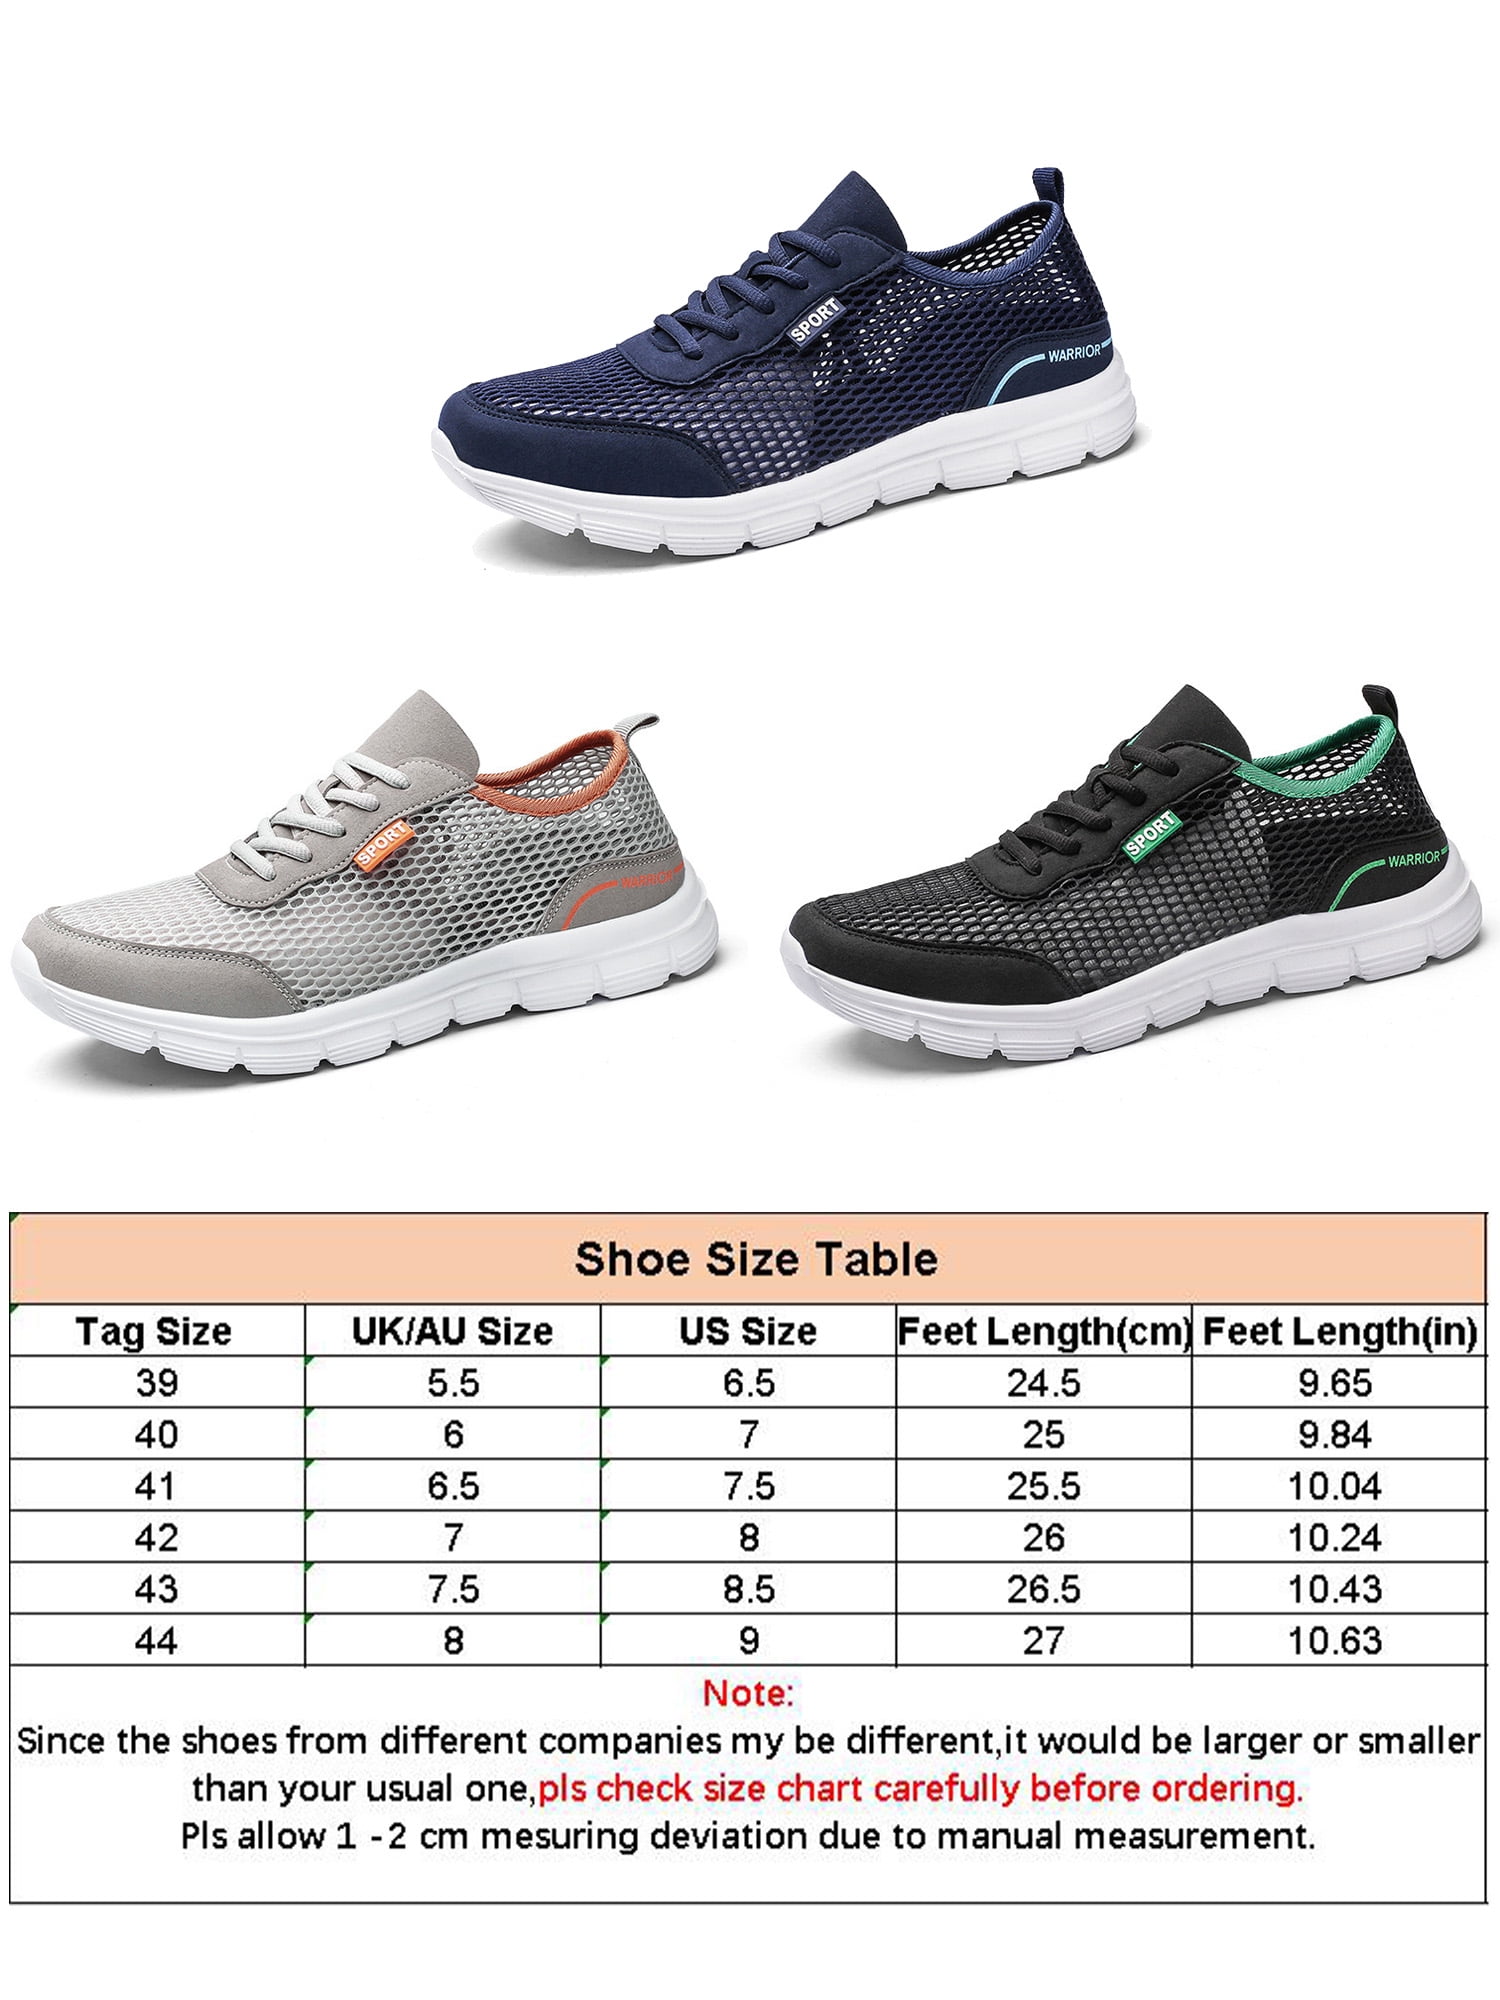 Shoes Men's Running Lightweight Casual Breathable Athletic Tennis Sneakers Gym